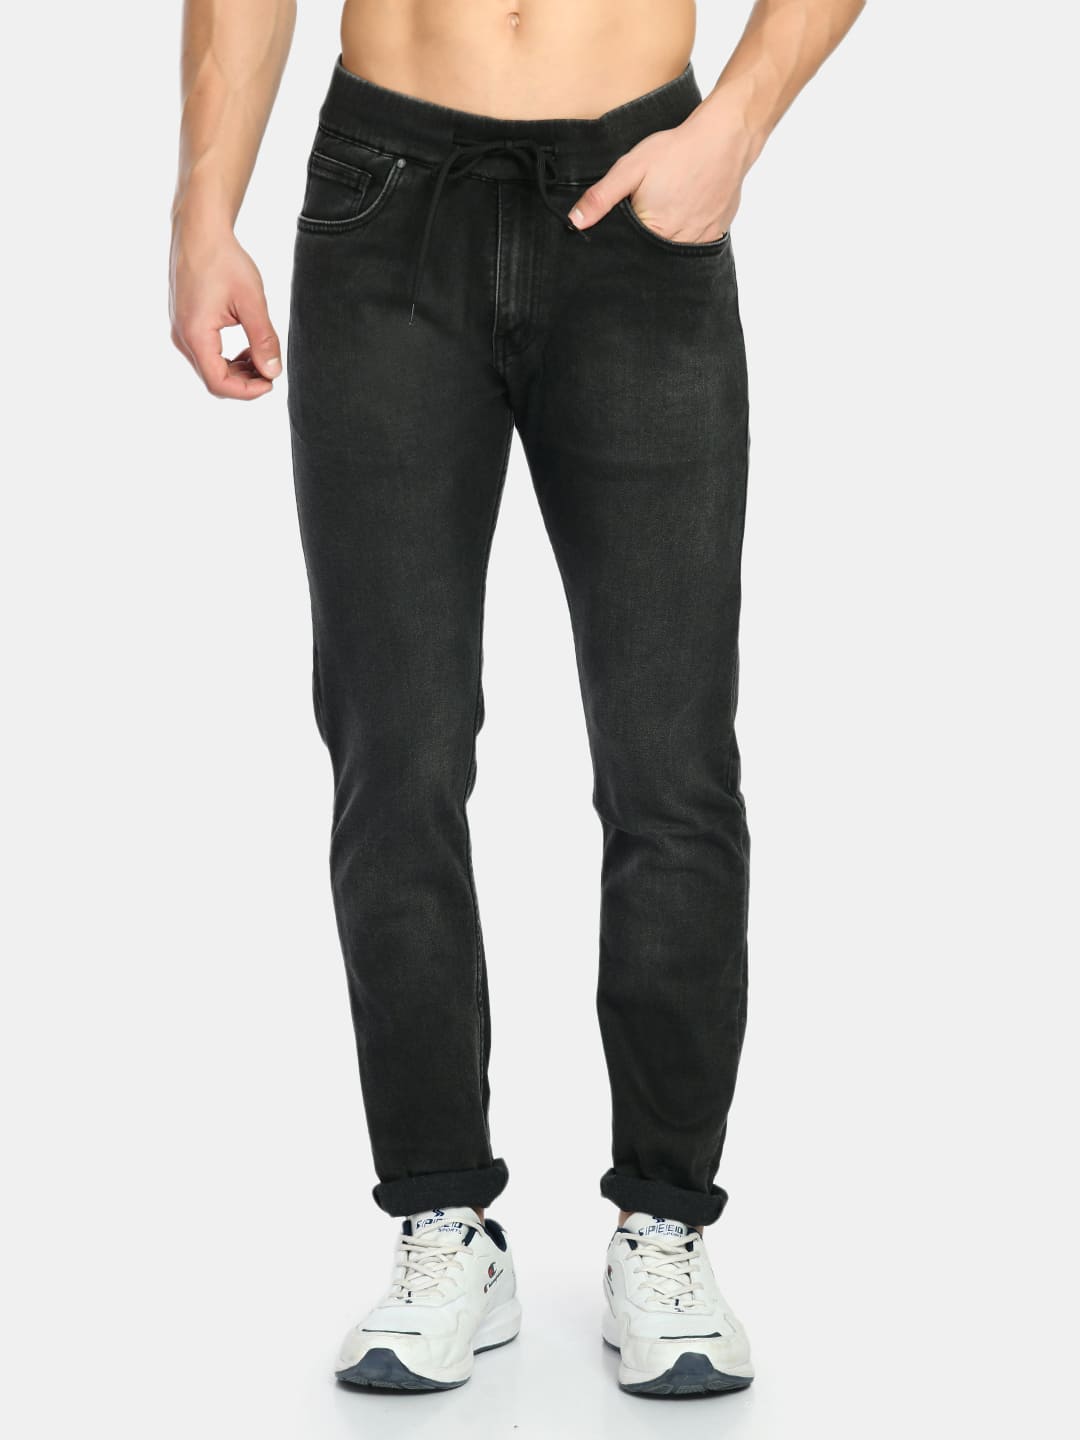 Men's Black Straight Fit Casual Jogger